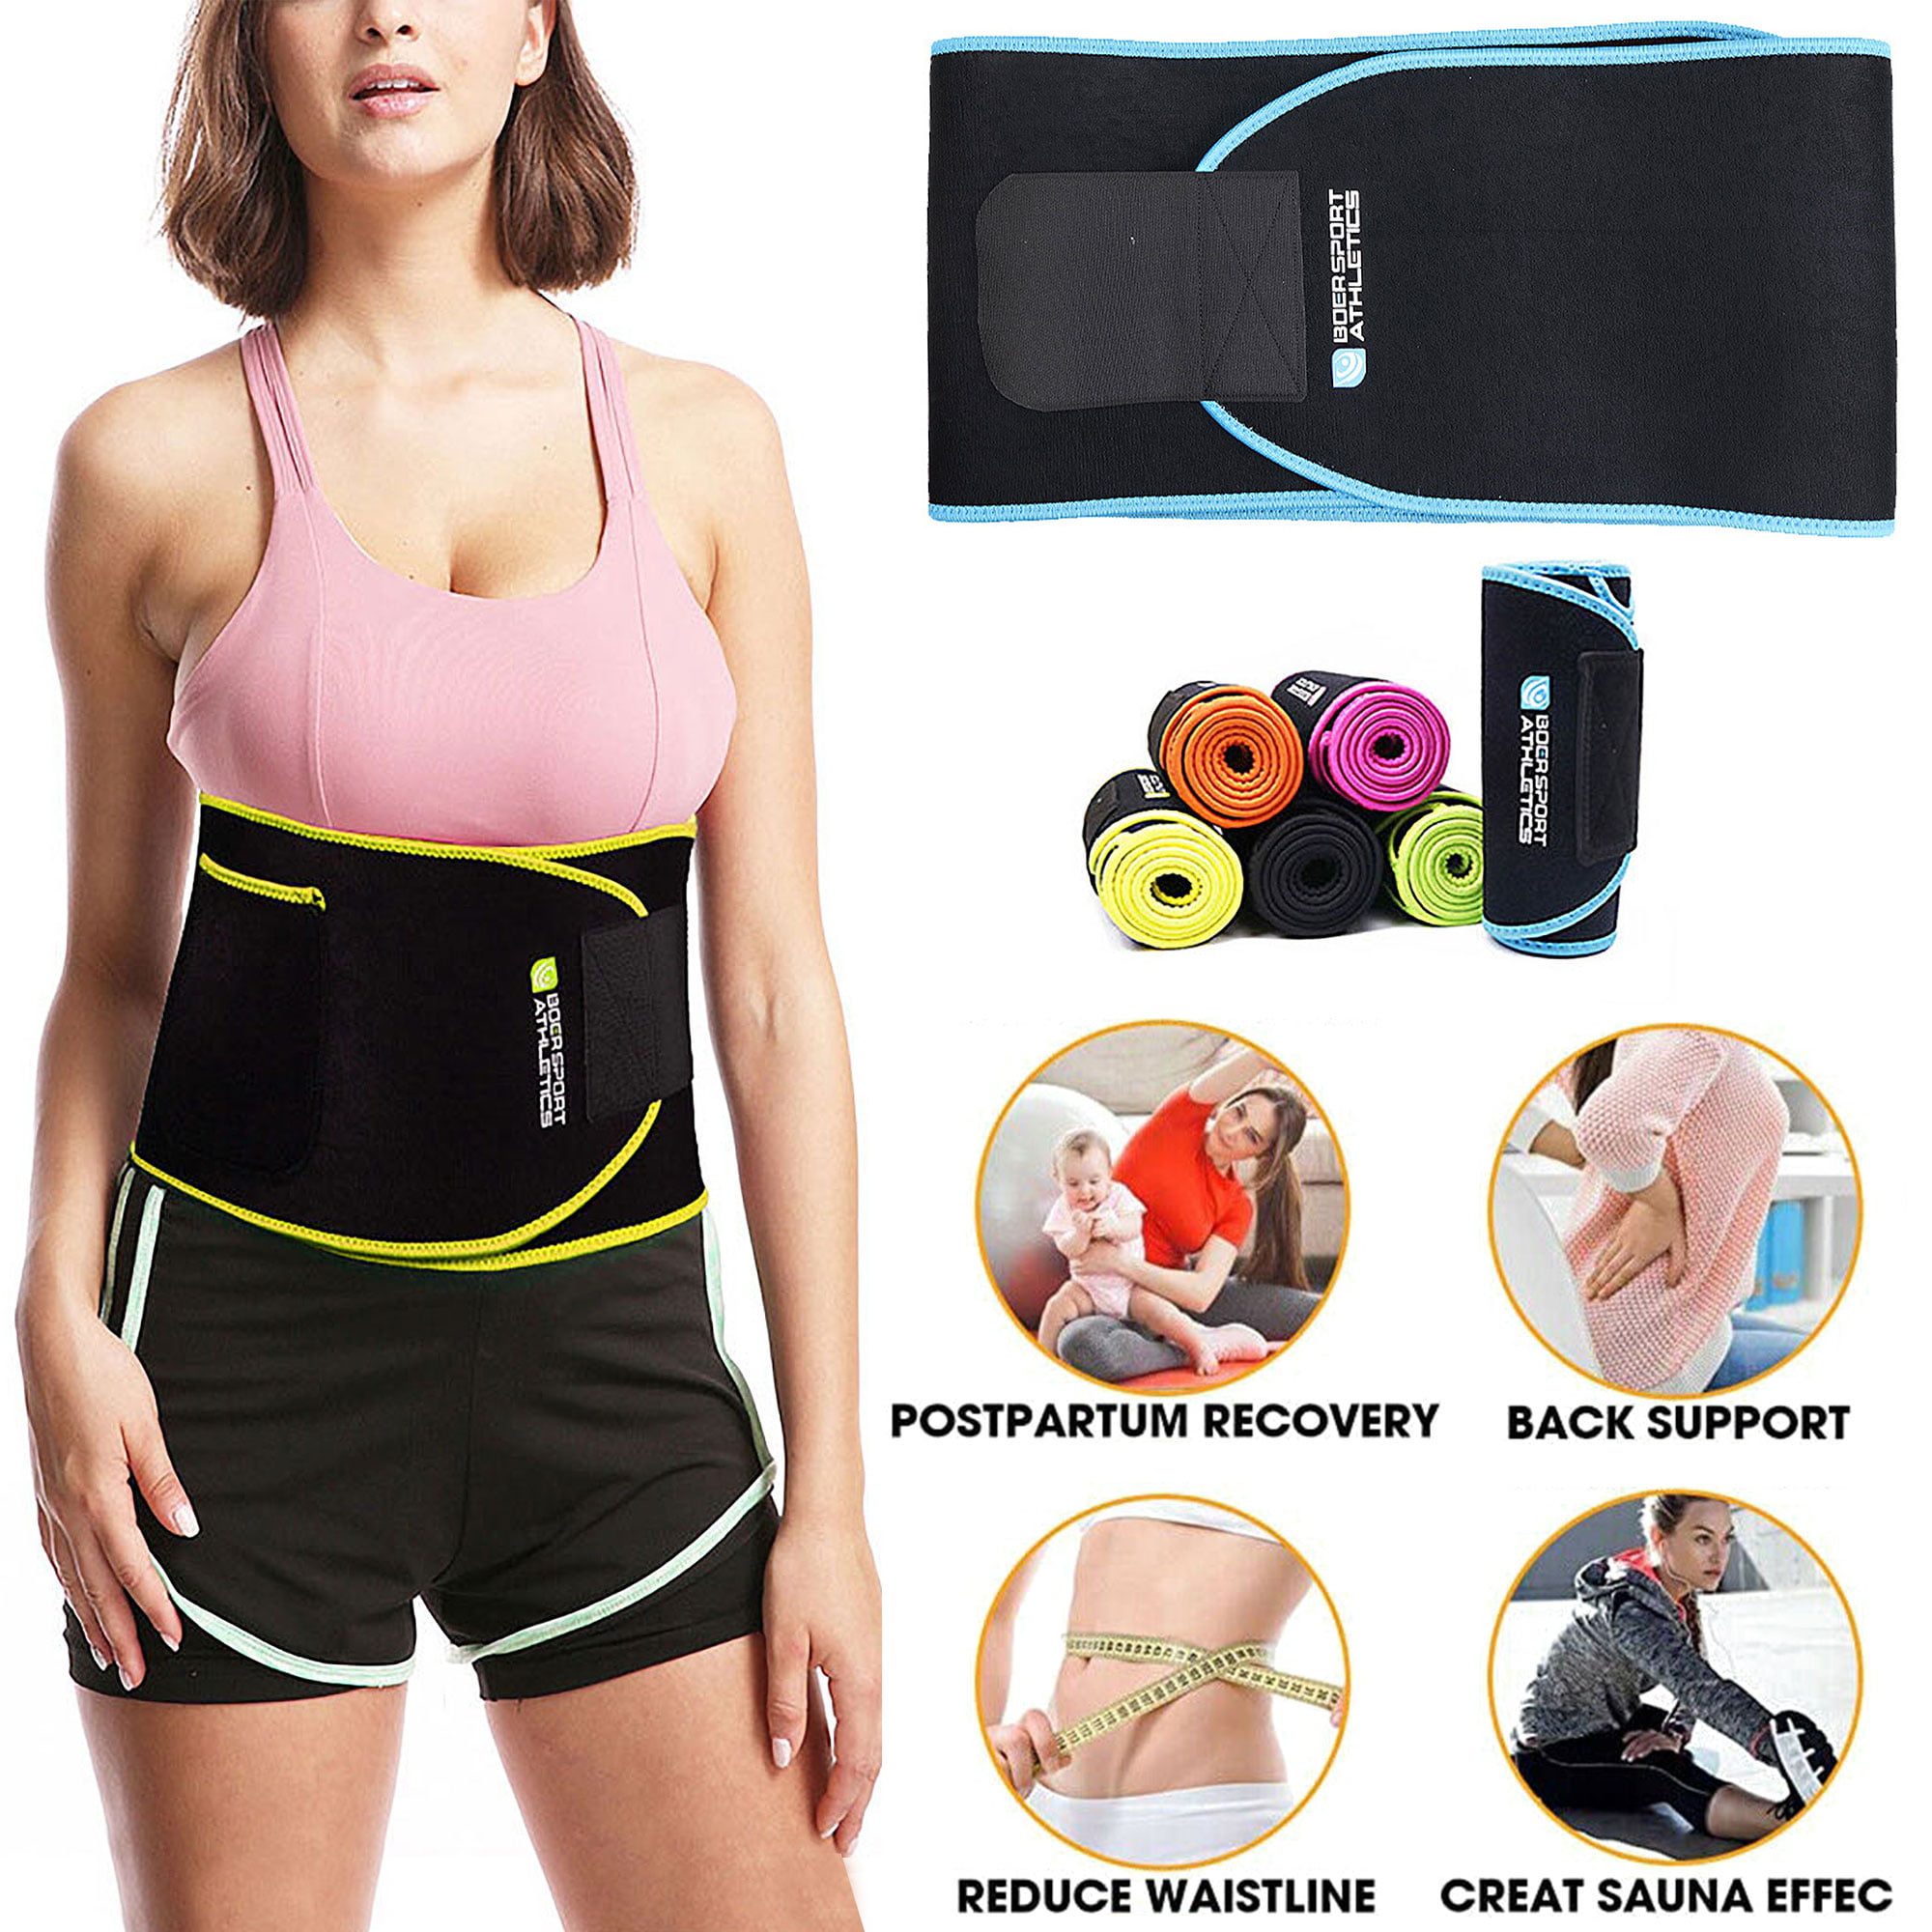 Black 3M/10FT Waist Trainer for Women & Men Lower Belly Fat,Adjustable Waist Trainer Belt Inside and Outside,Sweat Band Stomach Wraps for Weight Loss,Sport Workout Body Shaper Belt 